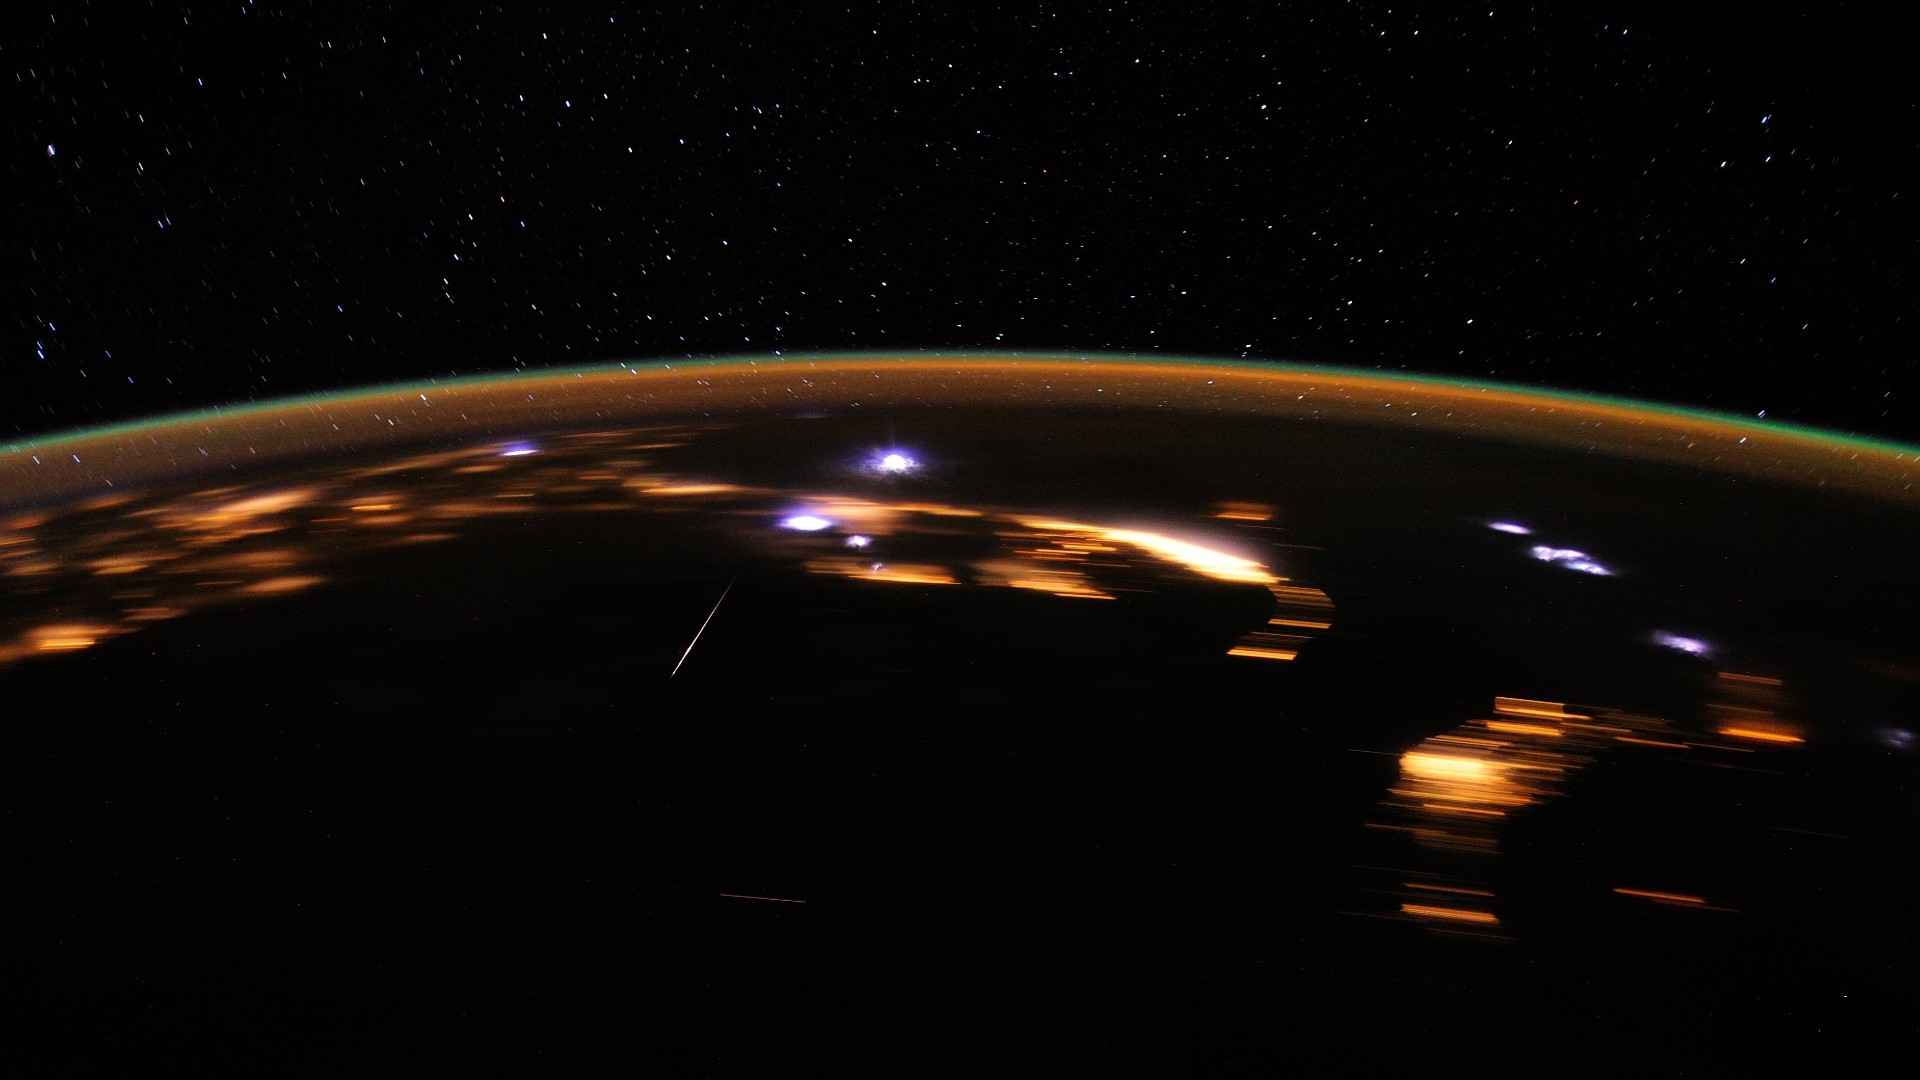 A Lyrid meteor seen from the International Space Station in 2012.